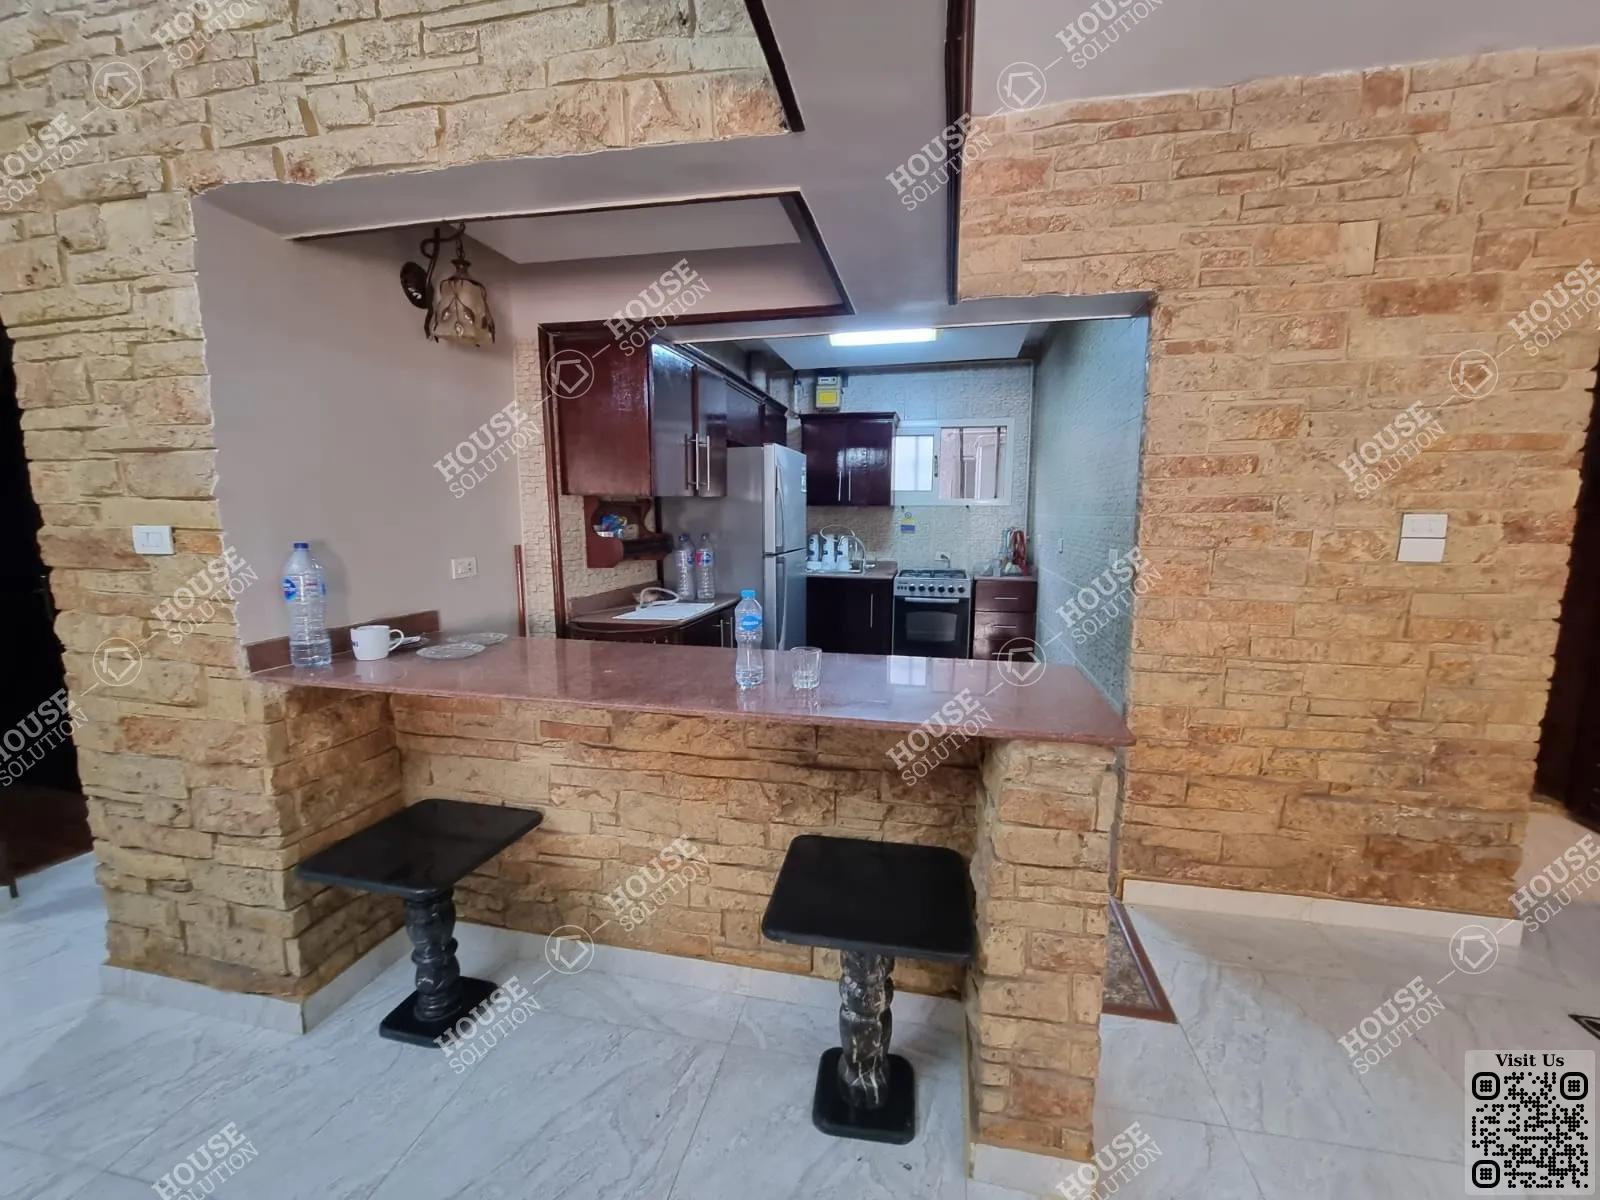 KITCHEN  @ Apartments For Rent In Maadi Maadi Degla Area: 110 m² consists of 2 Bedrooms 2 Bathrooms Furnished 5 stars #5229-1